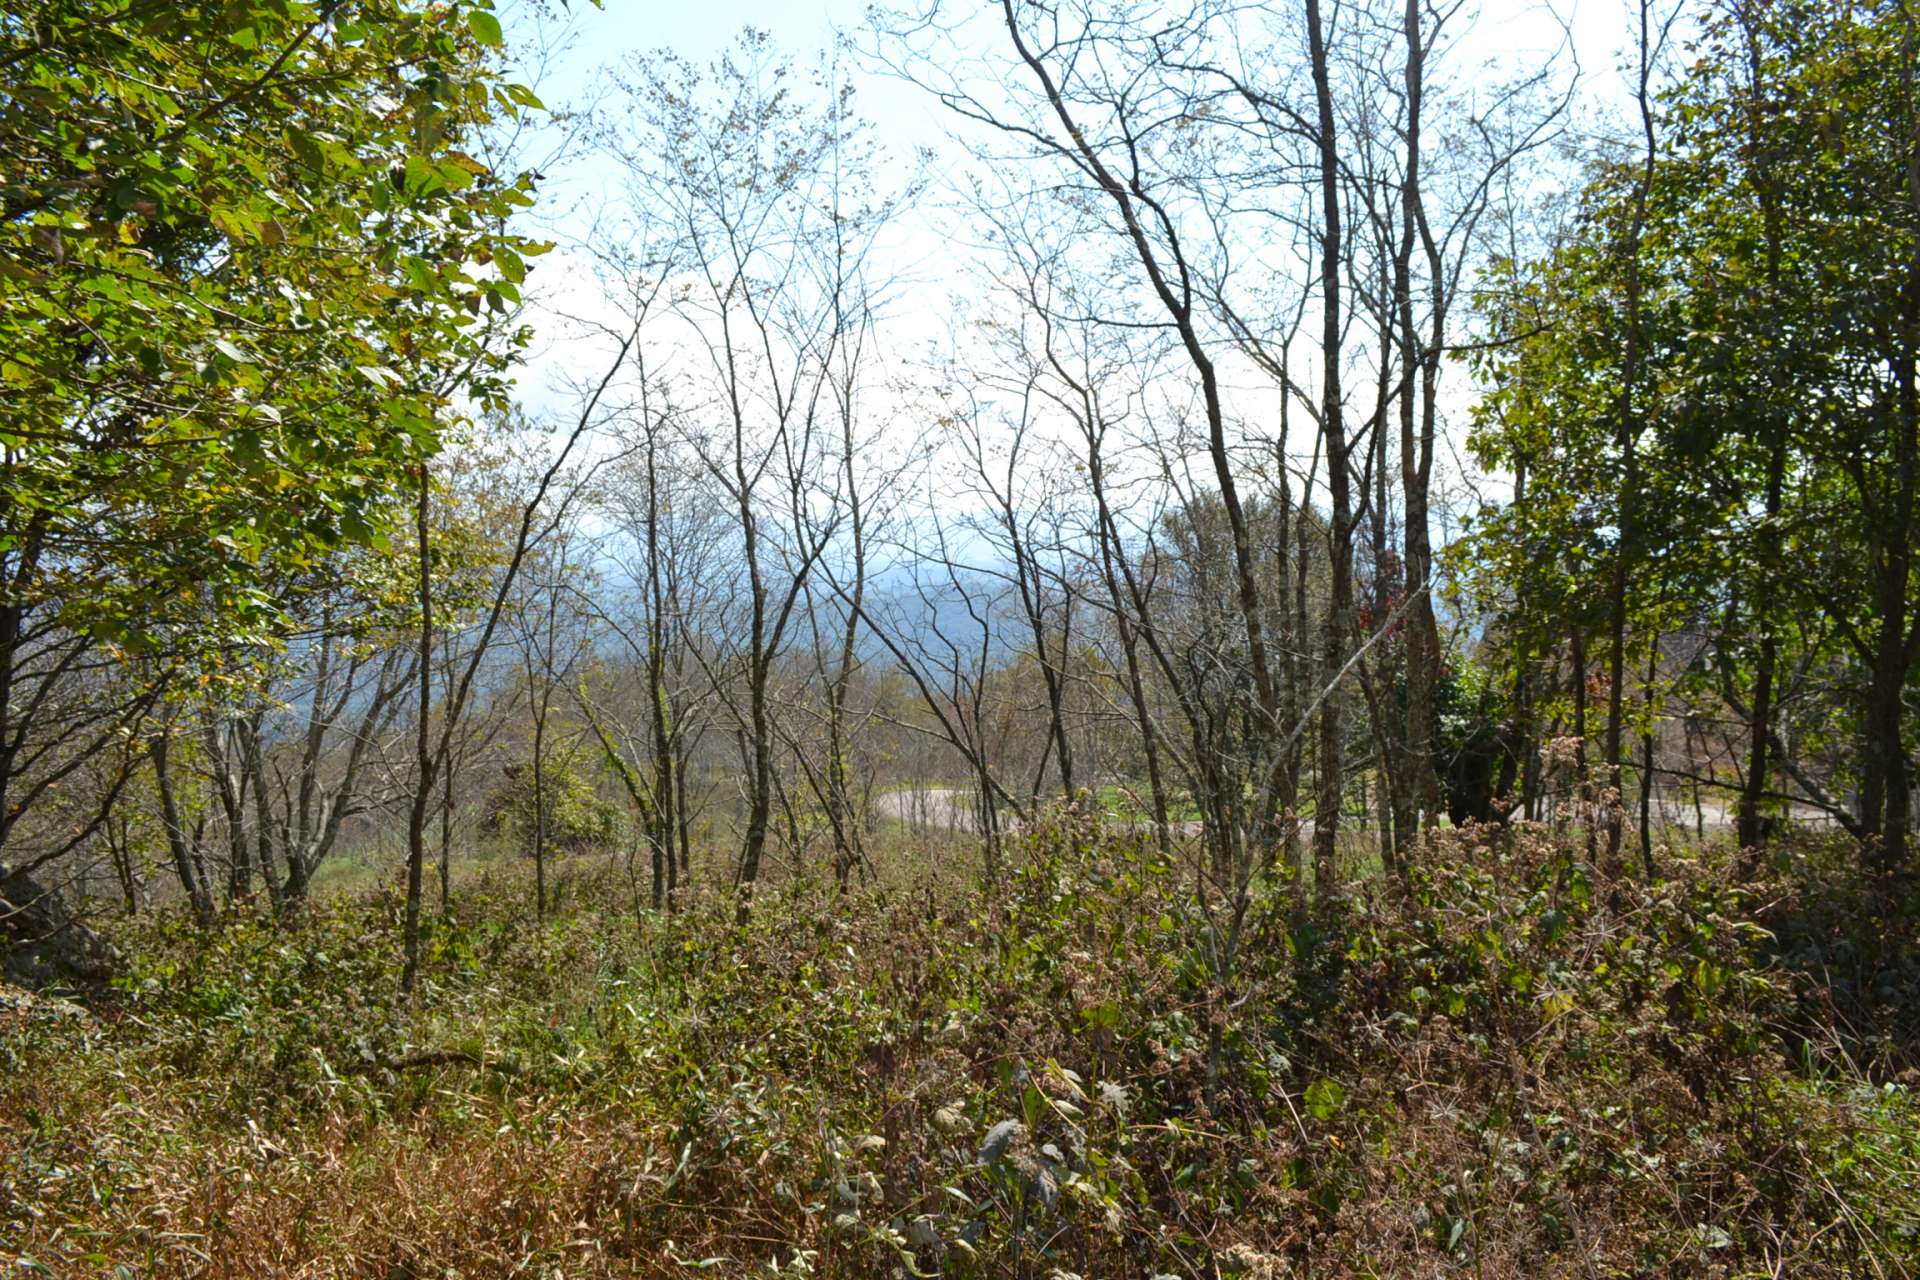 This photo was taken closer to the road frontage. An access to the natural area adjoins this tract.